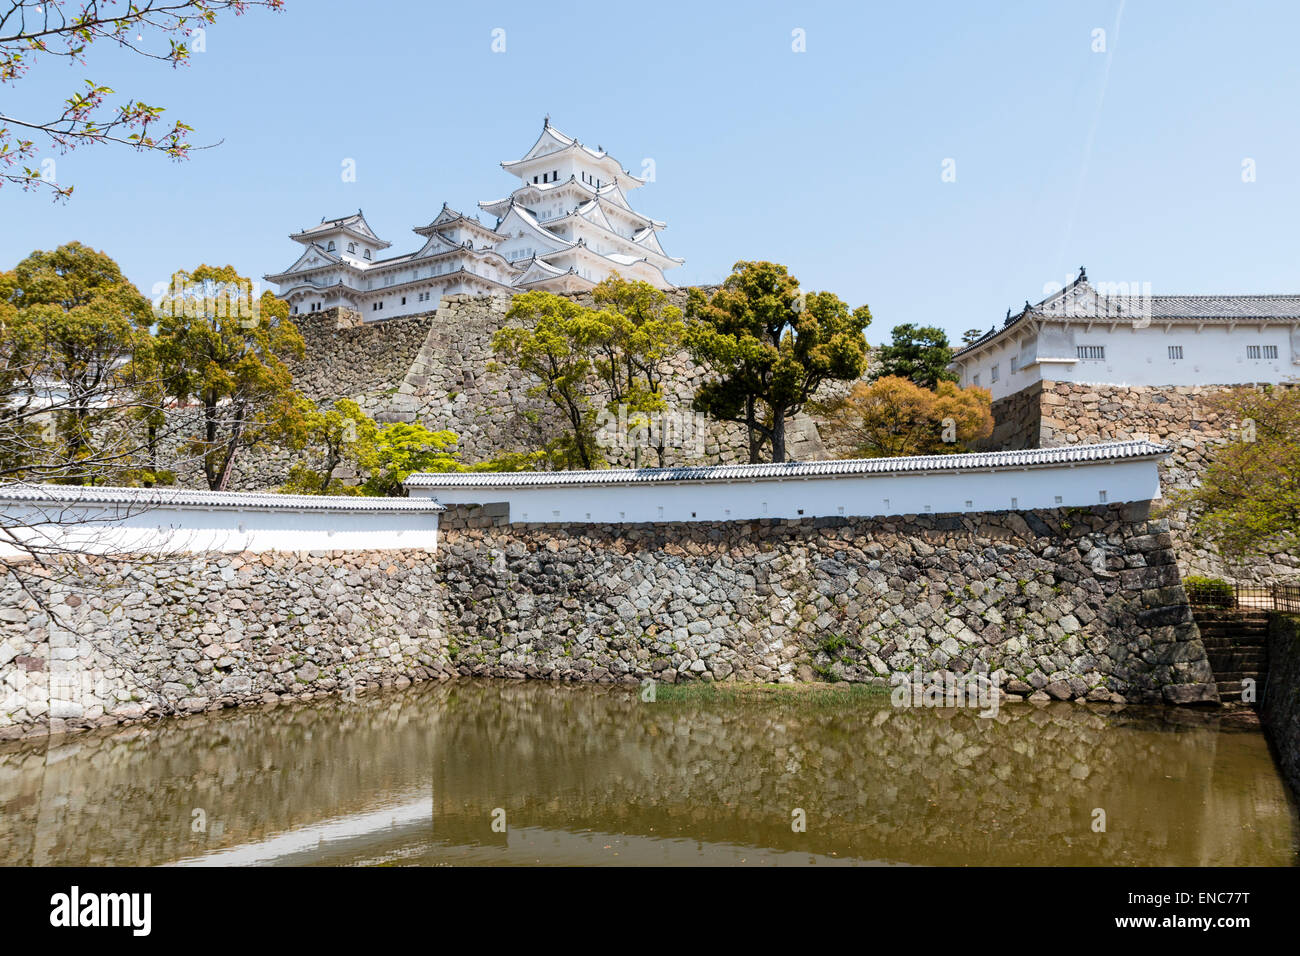 Himeji Castle, Japan. The Sangoku Bori, moat in foreground with Ishigaki tone walls  dobei walls, and the castle keep, the Daitenshu, in the background Stock Photo